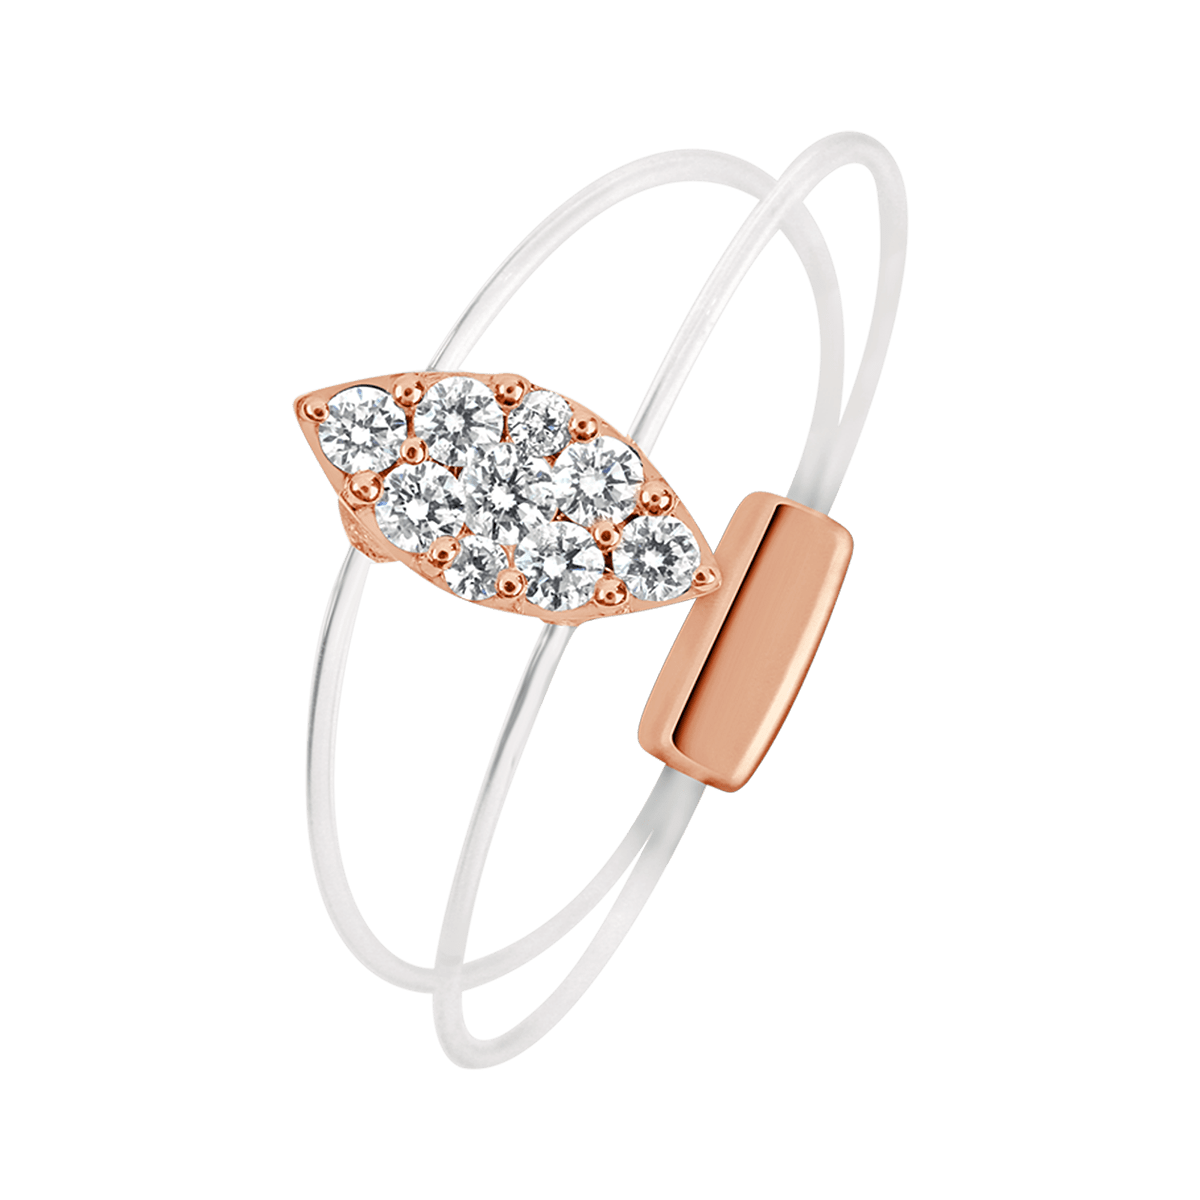 Marquise illusion yellow gold ring of Aura collection - horizontal